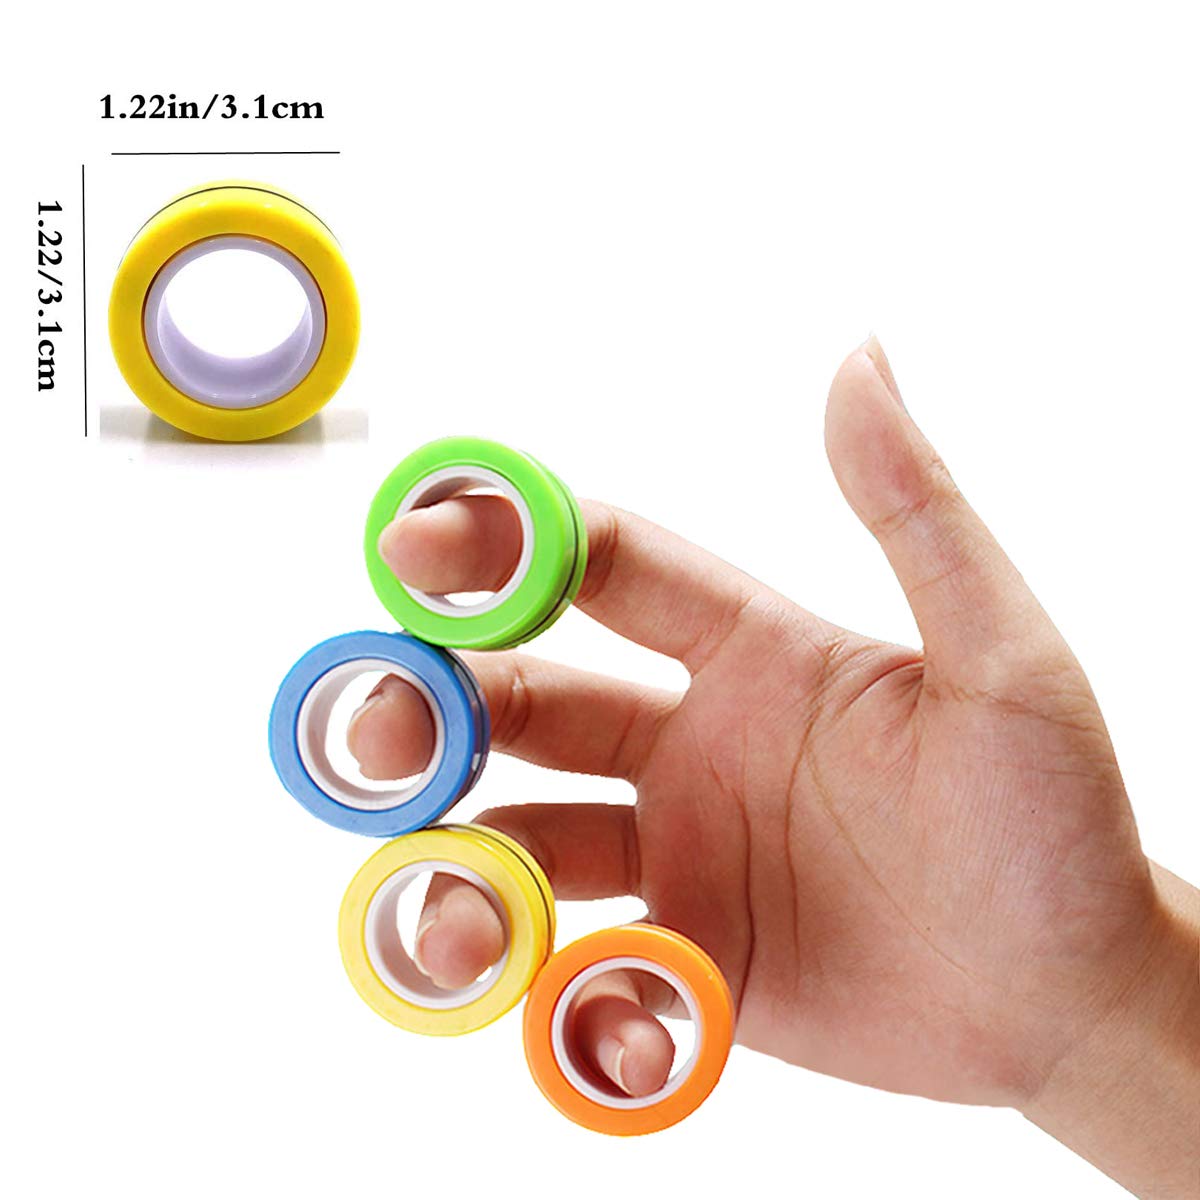 6PCS Magnetic Rings, Fidget Rings,Roller Rings,Adult Finger Fidget Toys, ADHD Anxiety Relief Decompression Magical Ring Fidget Toy,Funny Gifts kids Magnetic Spinner Ring for Boys Girls(Random Color)